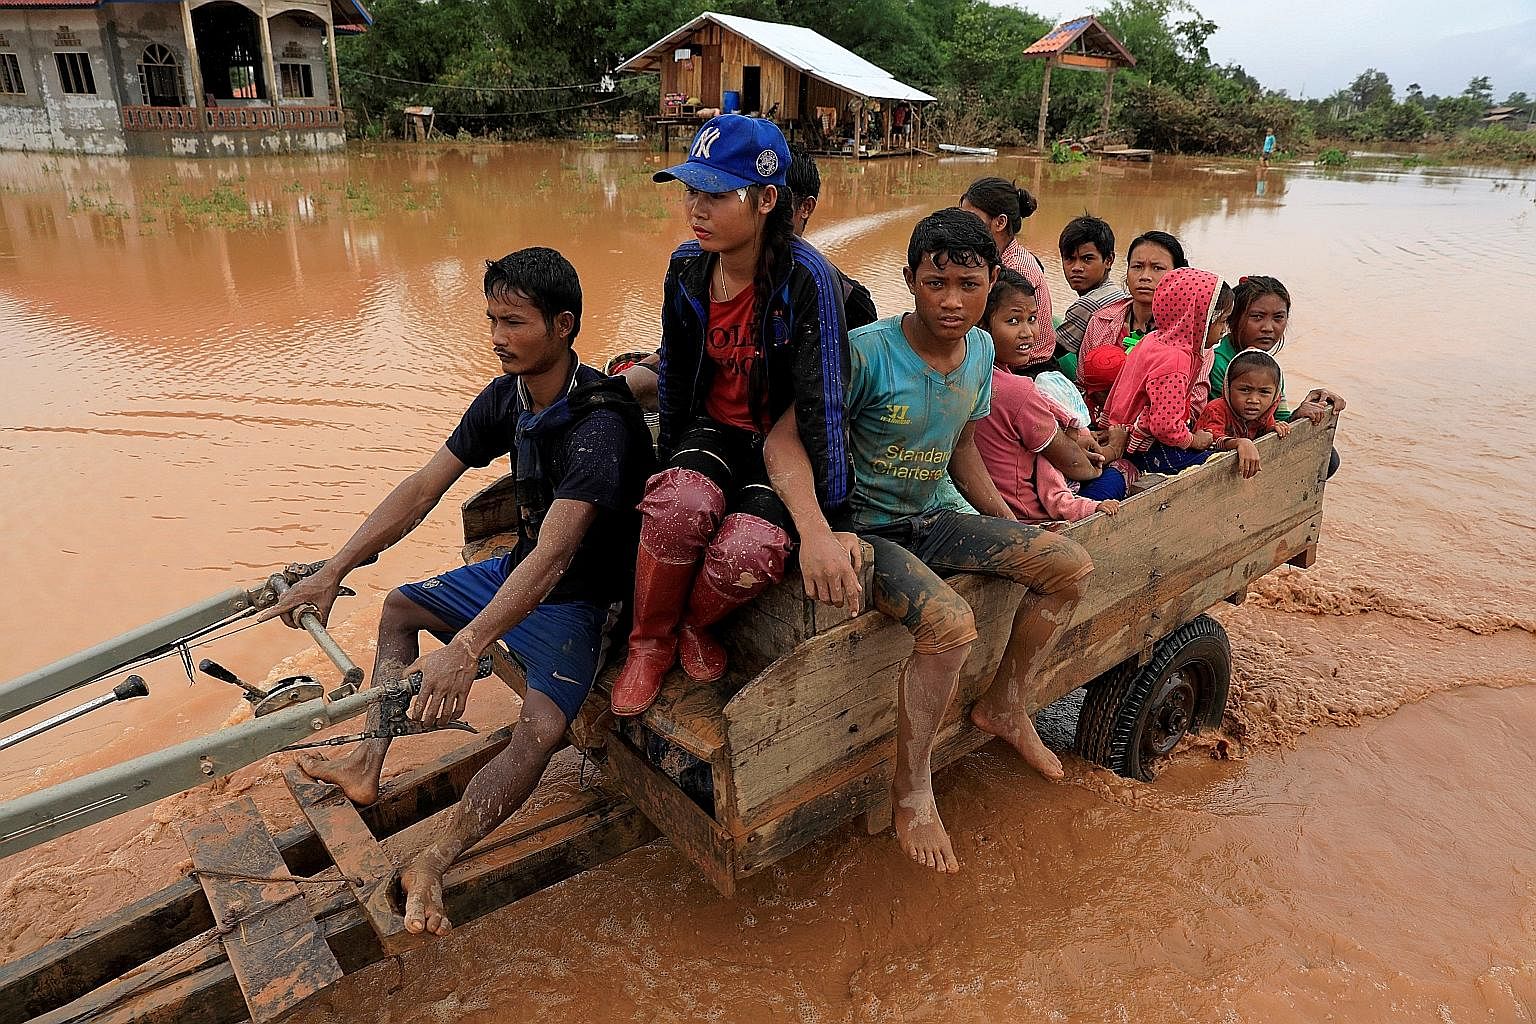 A family escaping the floods in Attapeu province, Laos.